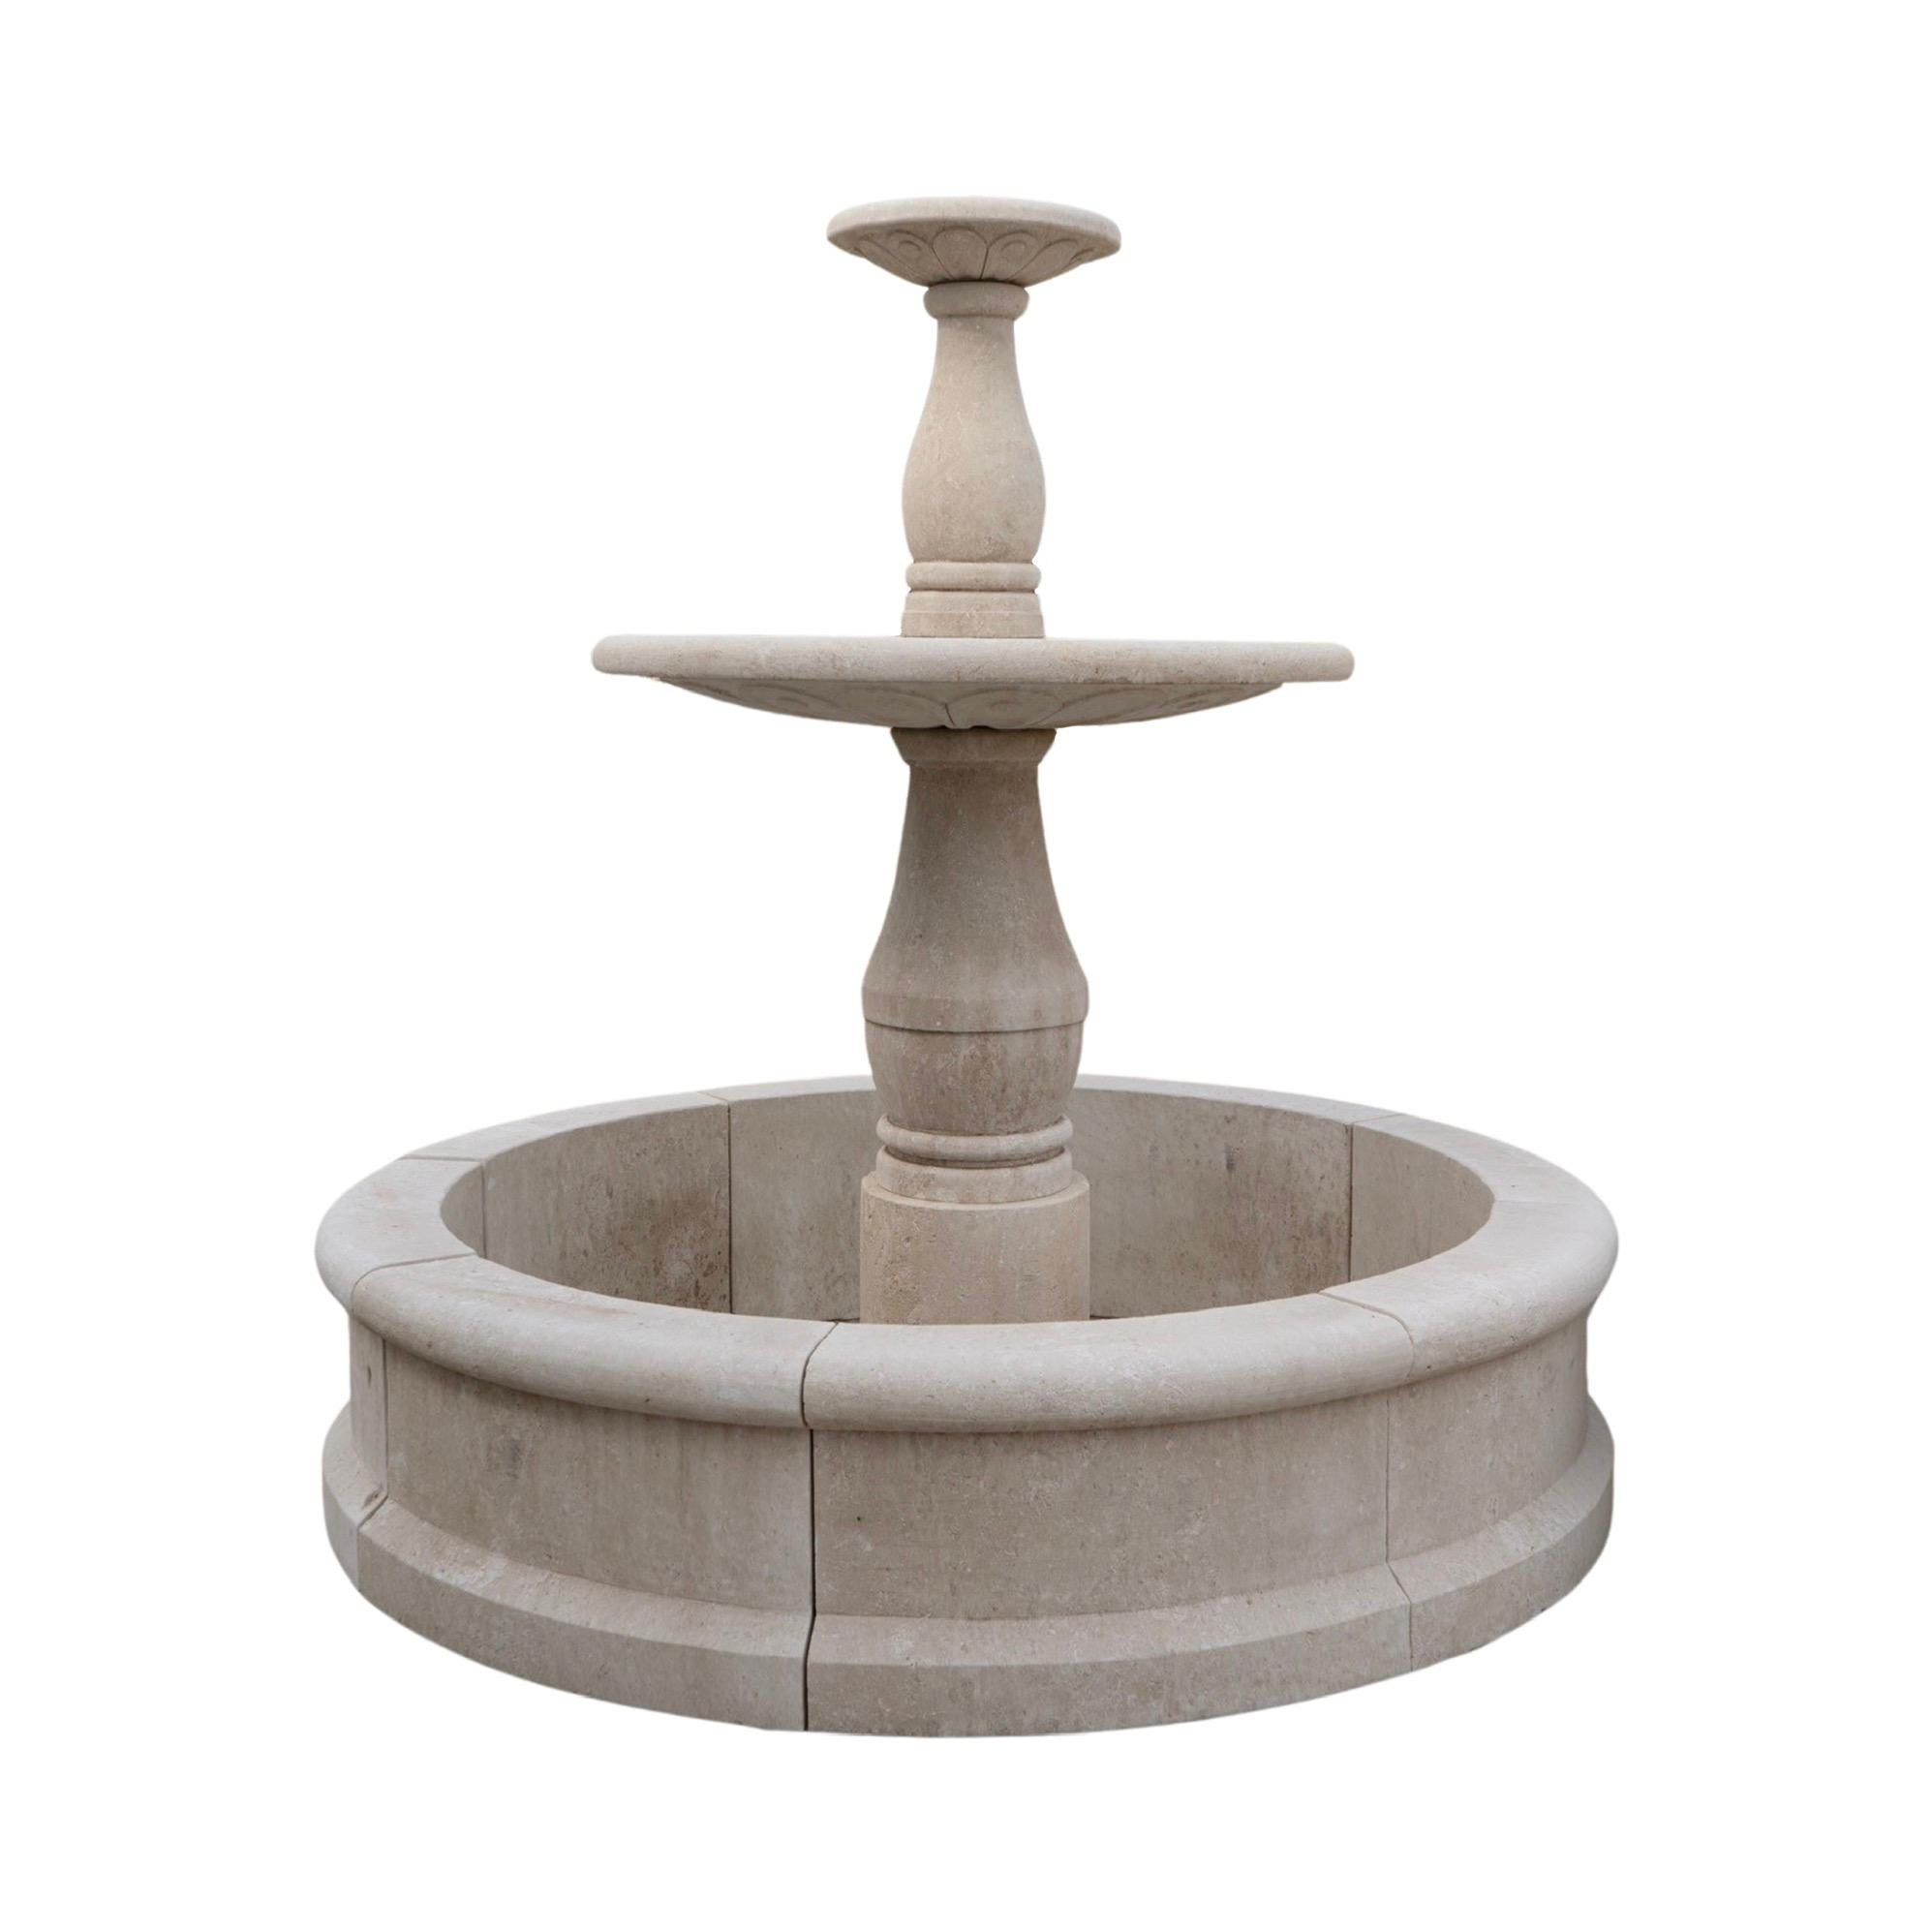 This French limestone central fountain adds a touch of French elegance to any outdoor space. The 2-tiered design features intricate carvings, and the durable limestone material ensures long-lasting beauty. The central style is perfect for creating a